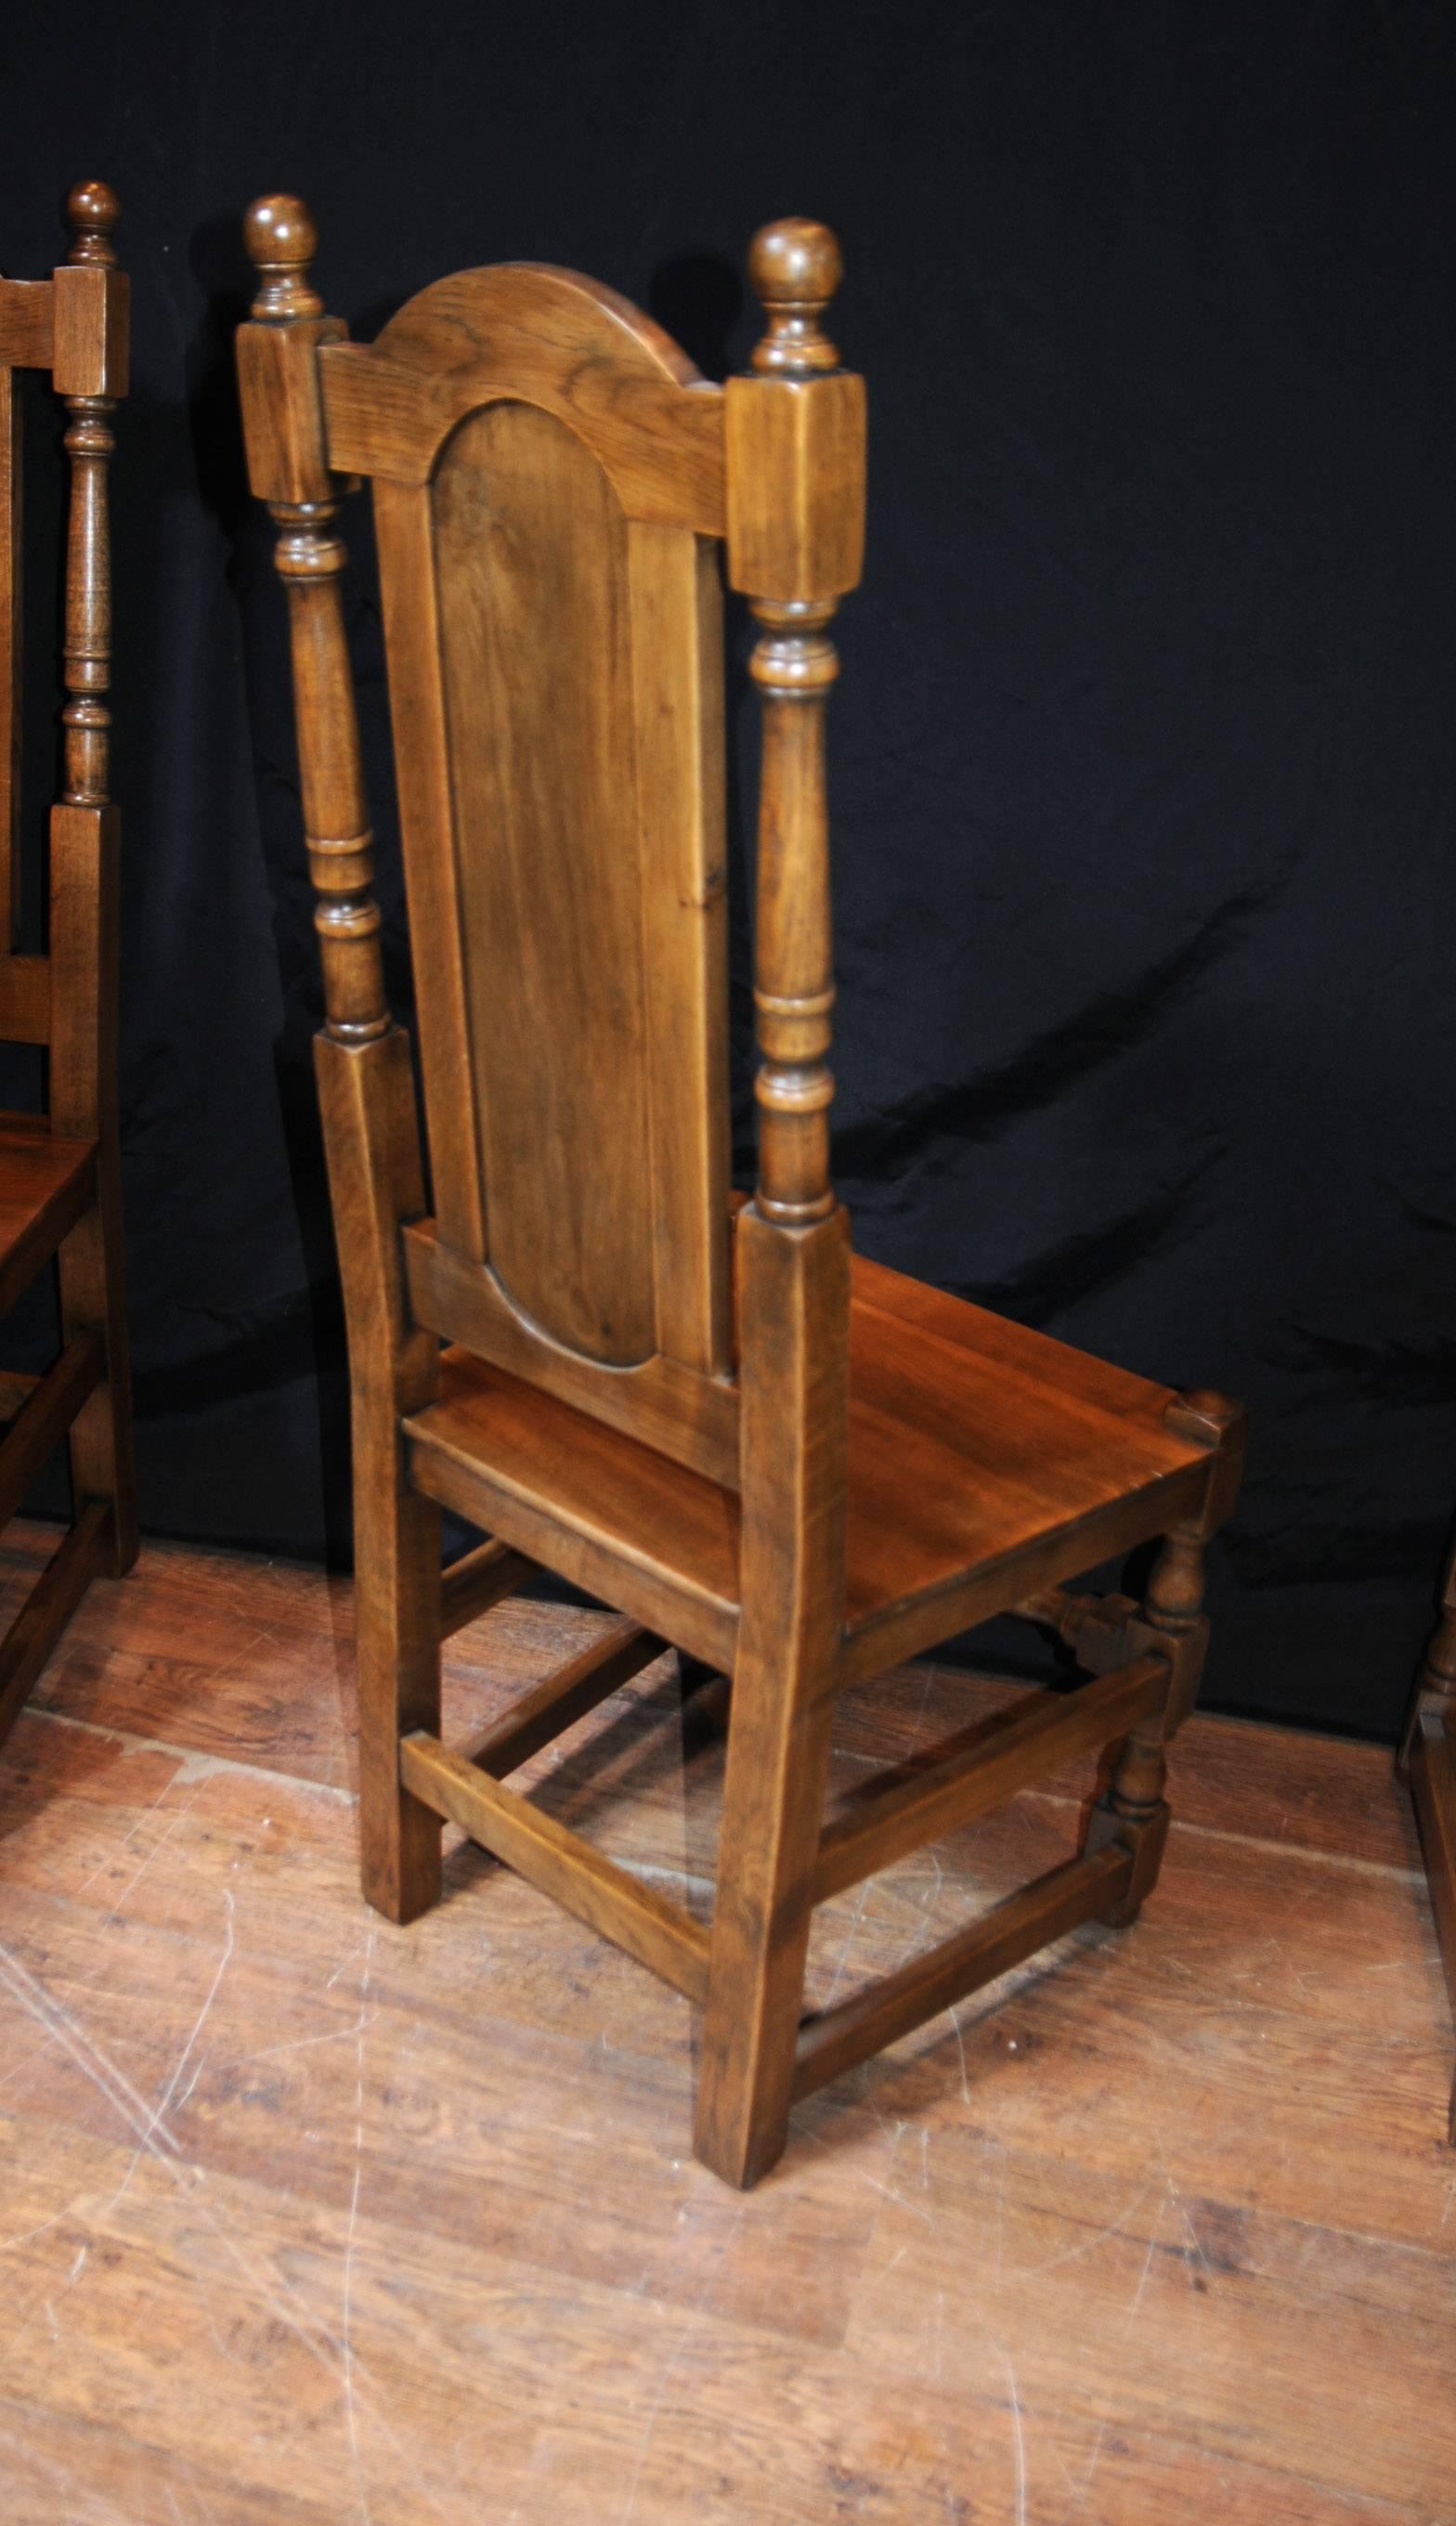 You are viewing an absolutely wonderful set of eight English Elizabethan / Tudor style dining chairs in oak. I hope the photos do this stunning set some justice, they are certainly more impressive in the flesh and would make for a stunning addition